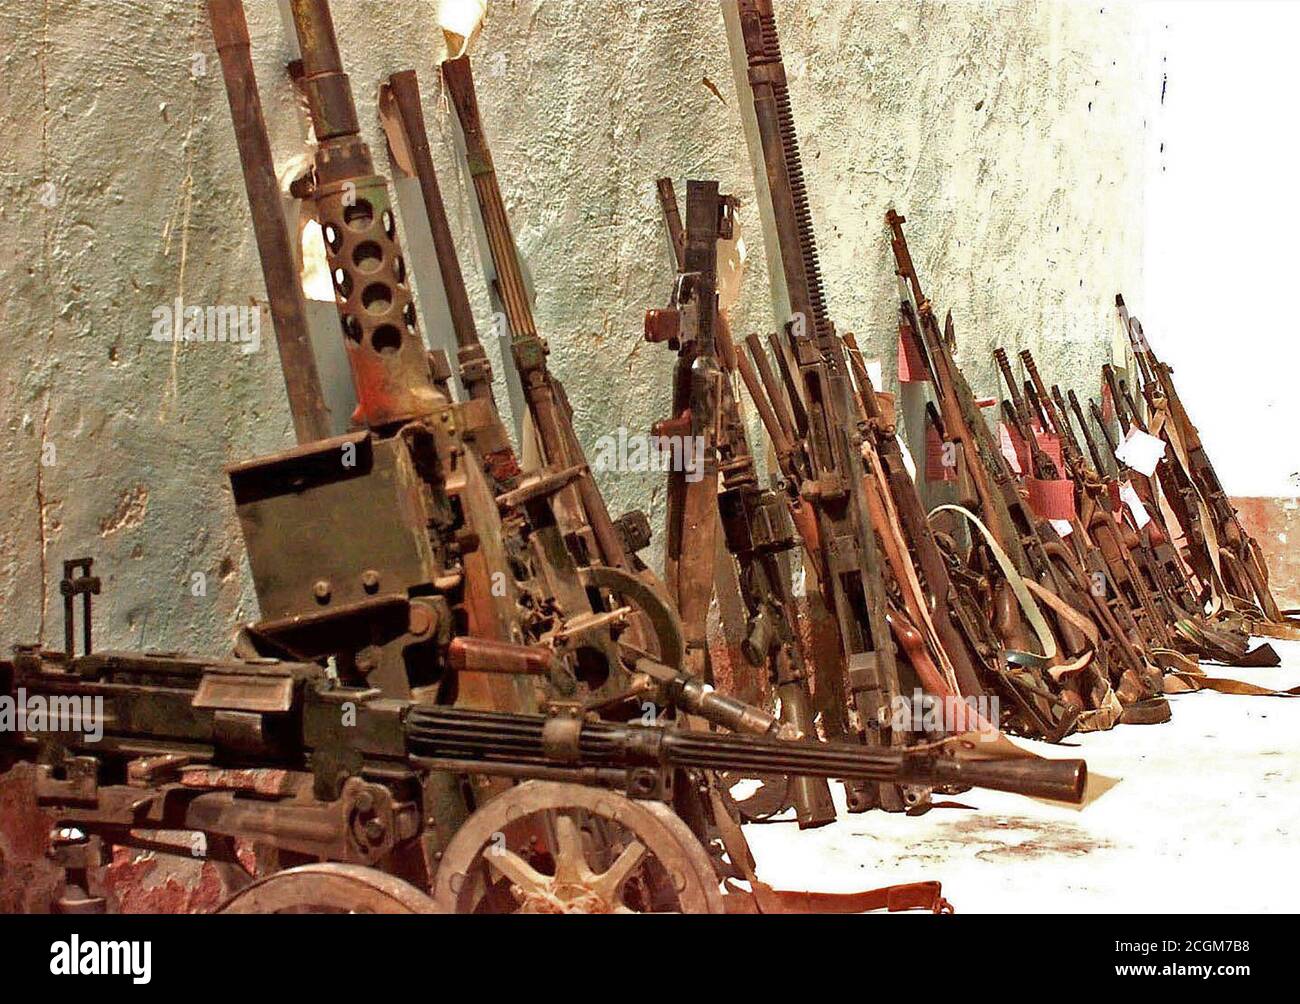 1993 - Confiscated Somali weapons at checkpoint Condor in Marka, Somalia.  They are mostly small arms and crew weapons that are lined up against the wall of a building. Stock Photo